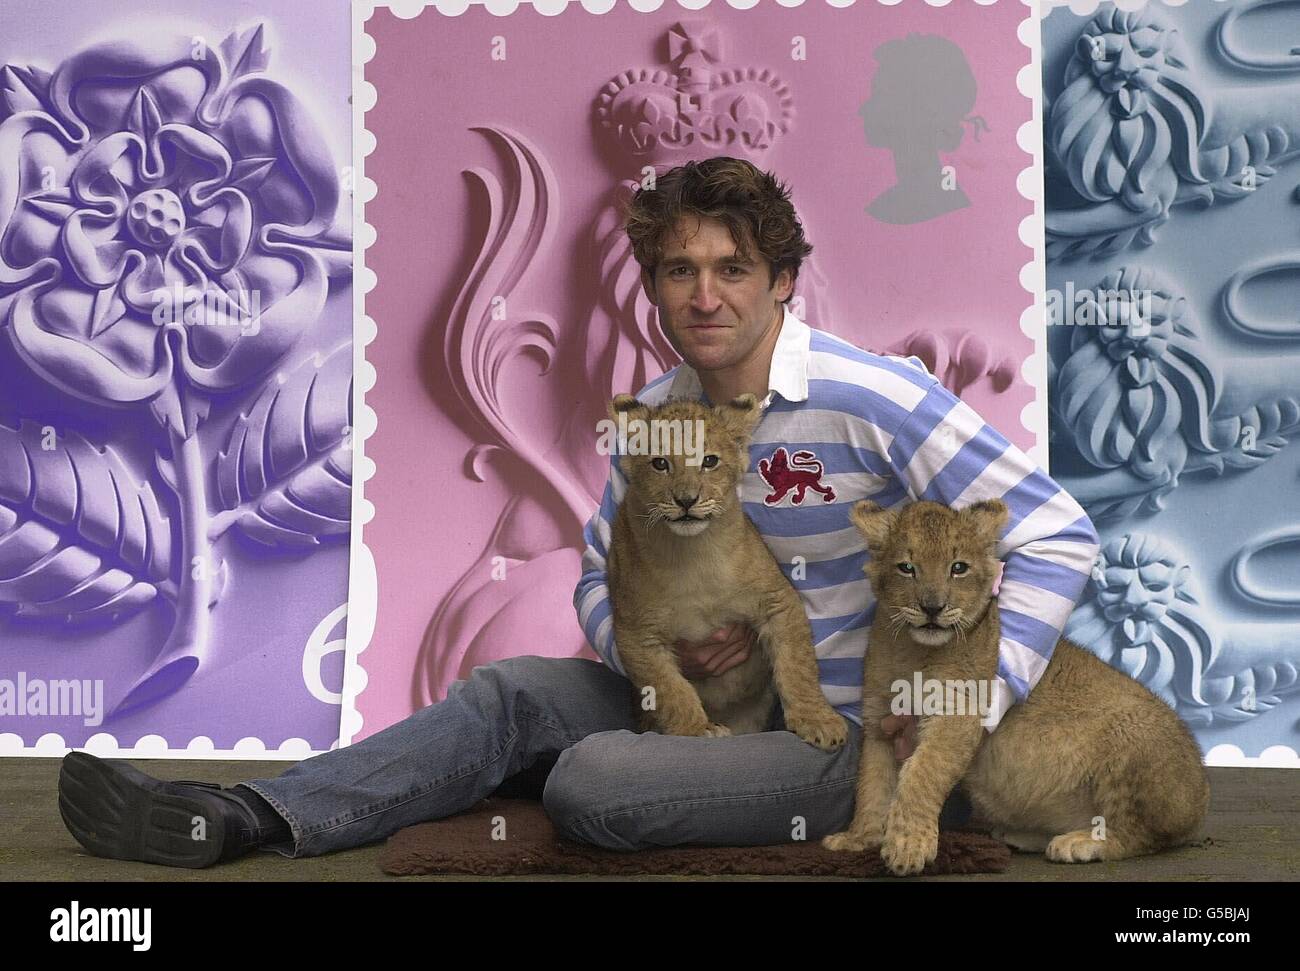 Actor Jonathan Cake, who stars in the forthcoming film Biggles, with Lion cubs Ben at the launch of the St. George's Day issue of new Royal Mail stamps at the headquarters of Consignia (formerly the Post Office), central London. *...The set, issued on 23 April 2001, feature the Crowned Lion of England, (1st class), the English Rose and the Three Lions of England (2nd class, not shown). Stock Photo